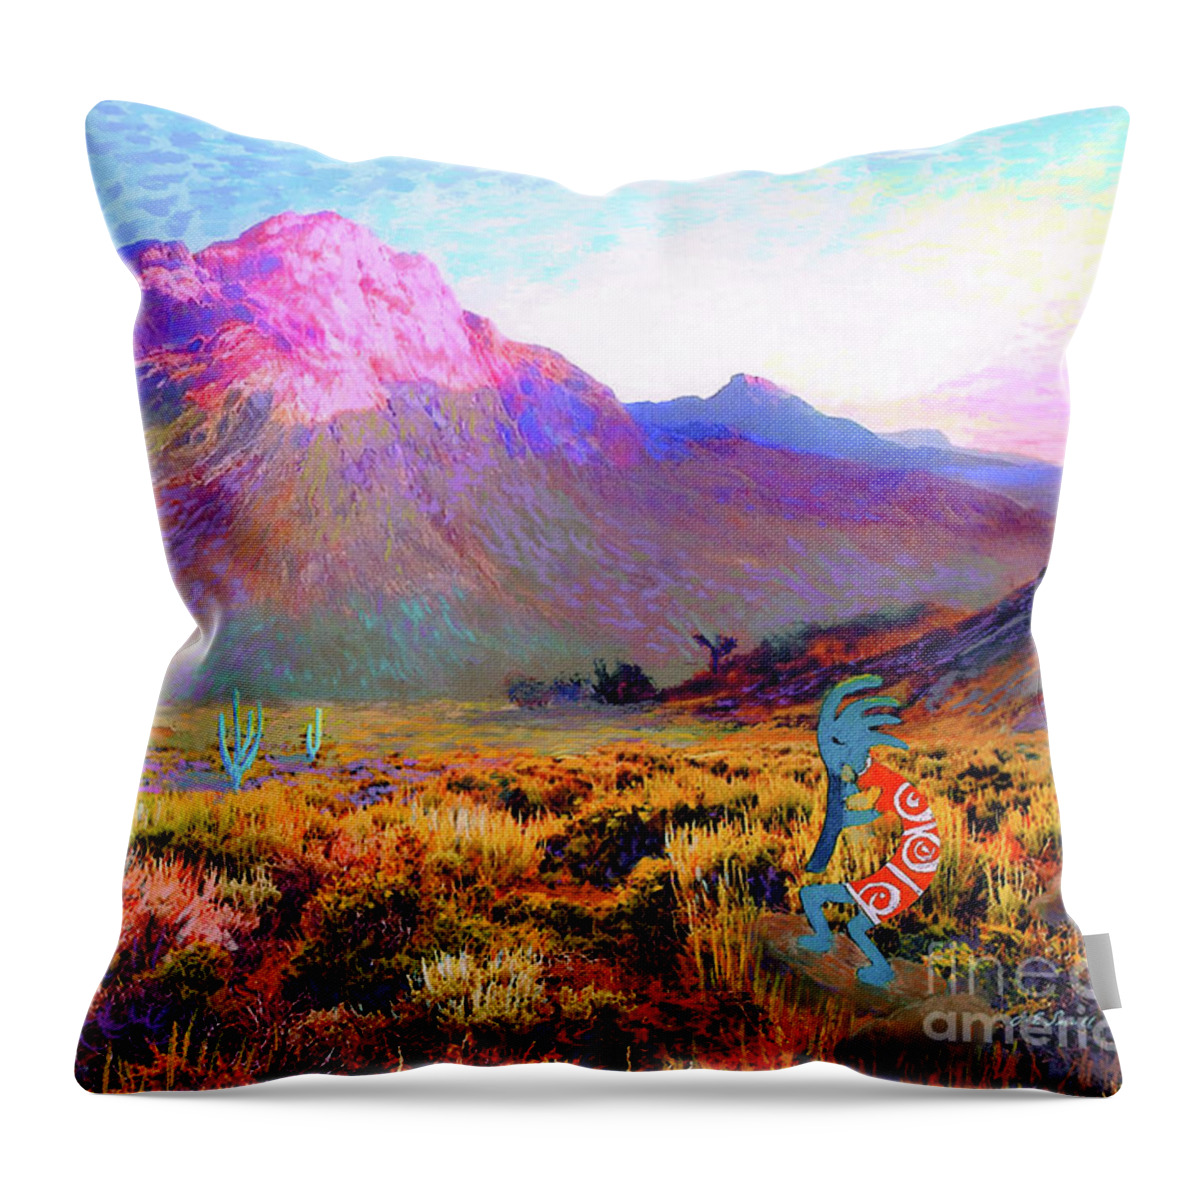 Spiritual Throw Pillow featuring the painting Kokopelli Dawn by Jane Small